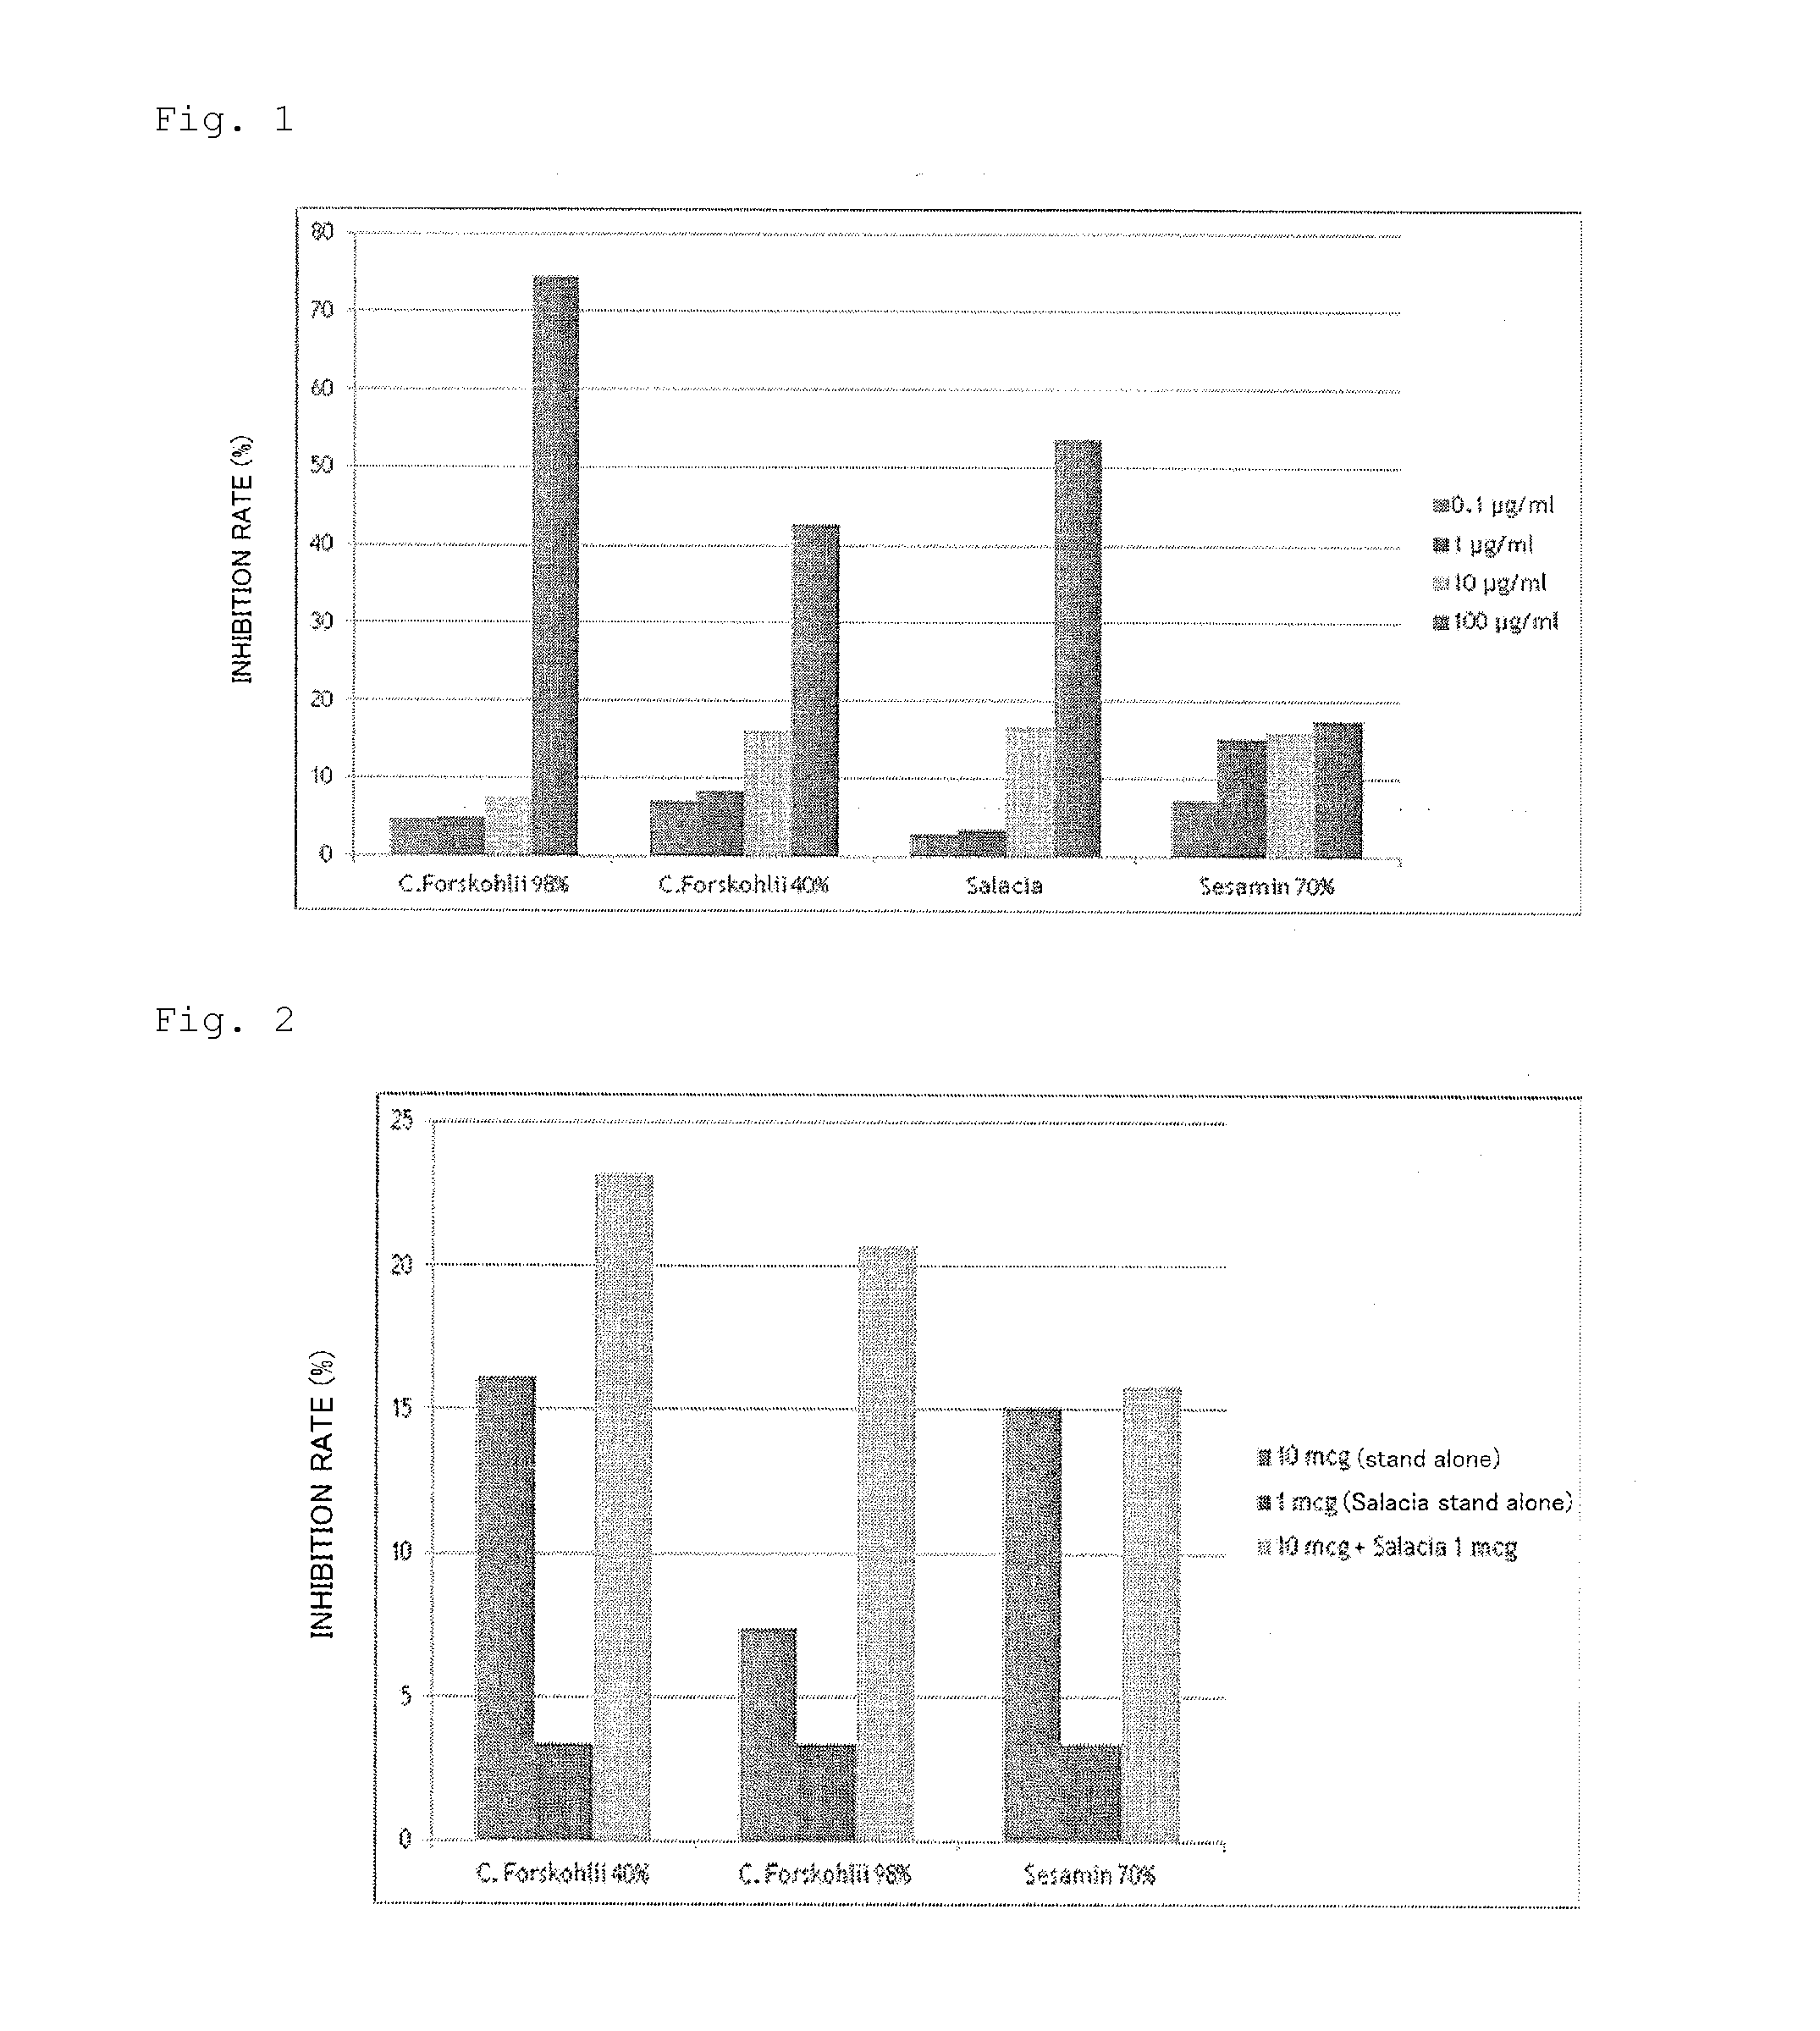 Composition and method for the safe and effective inhibition of pancreatic lipase in mammals